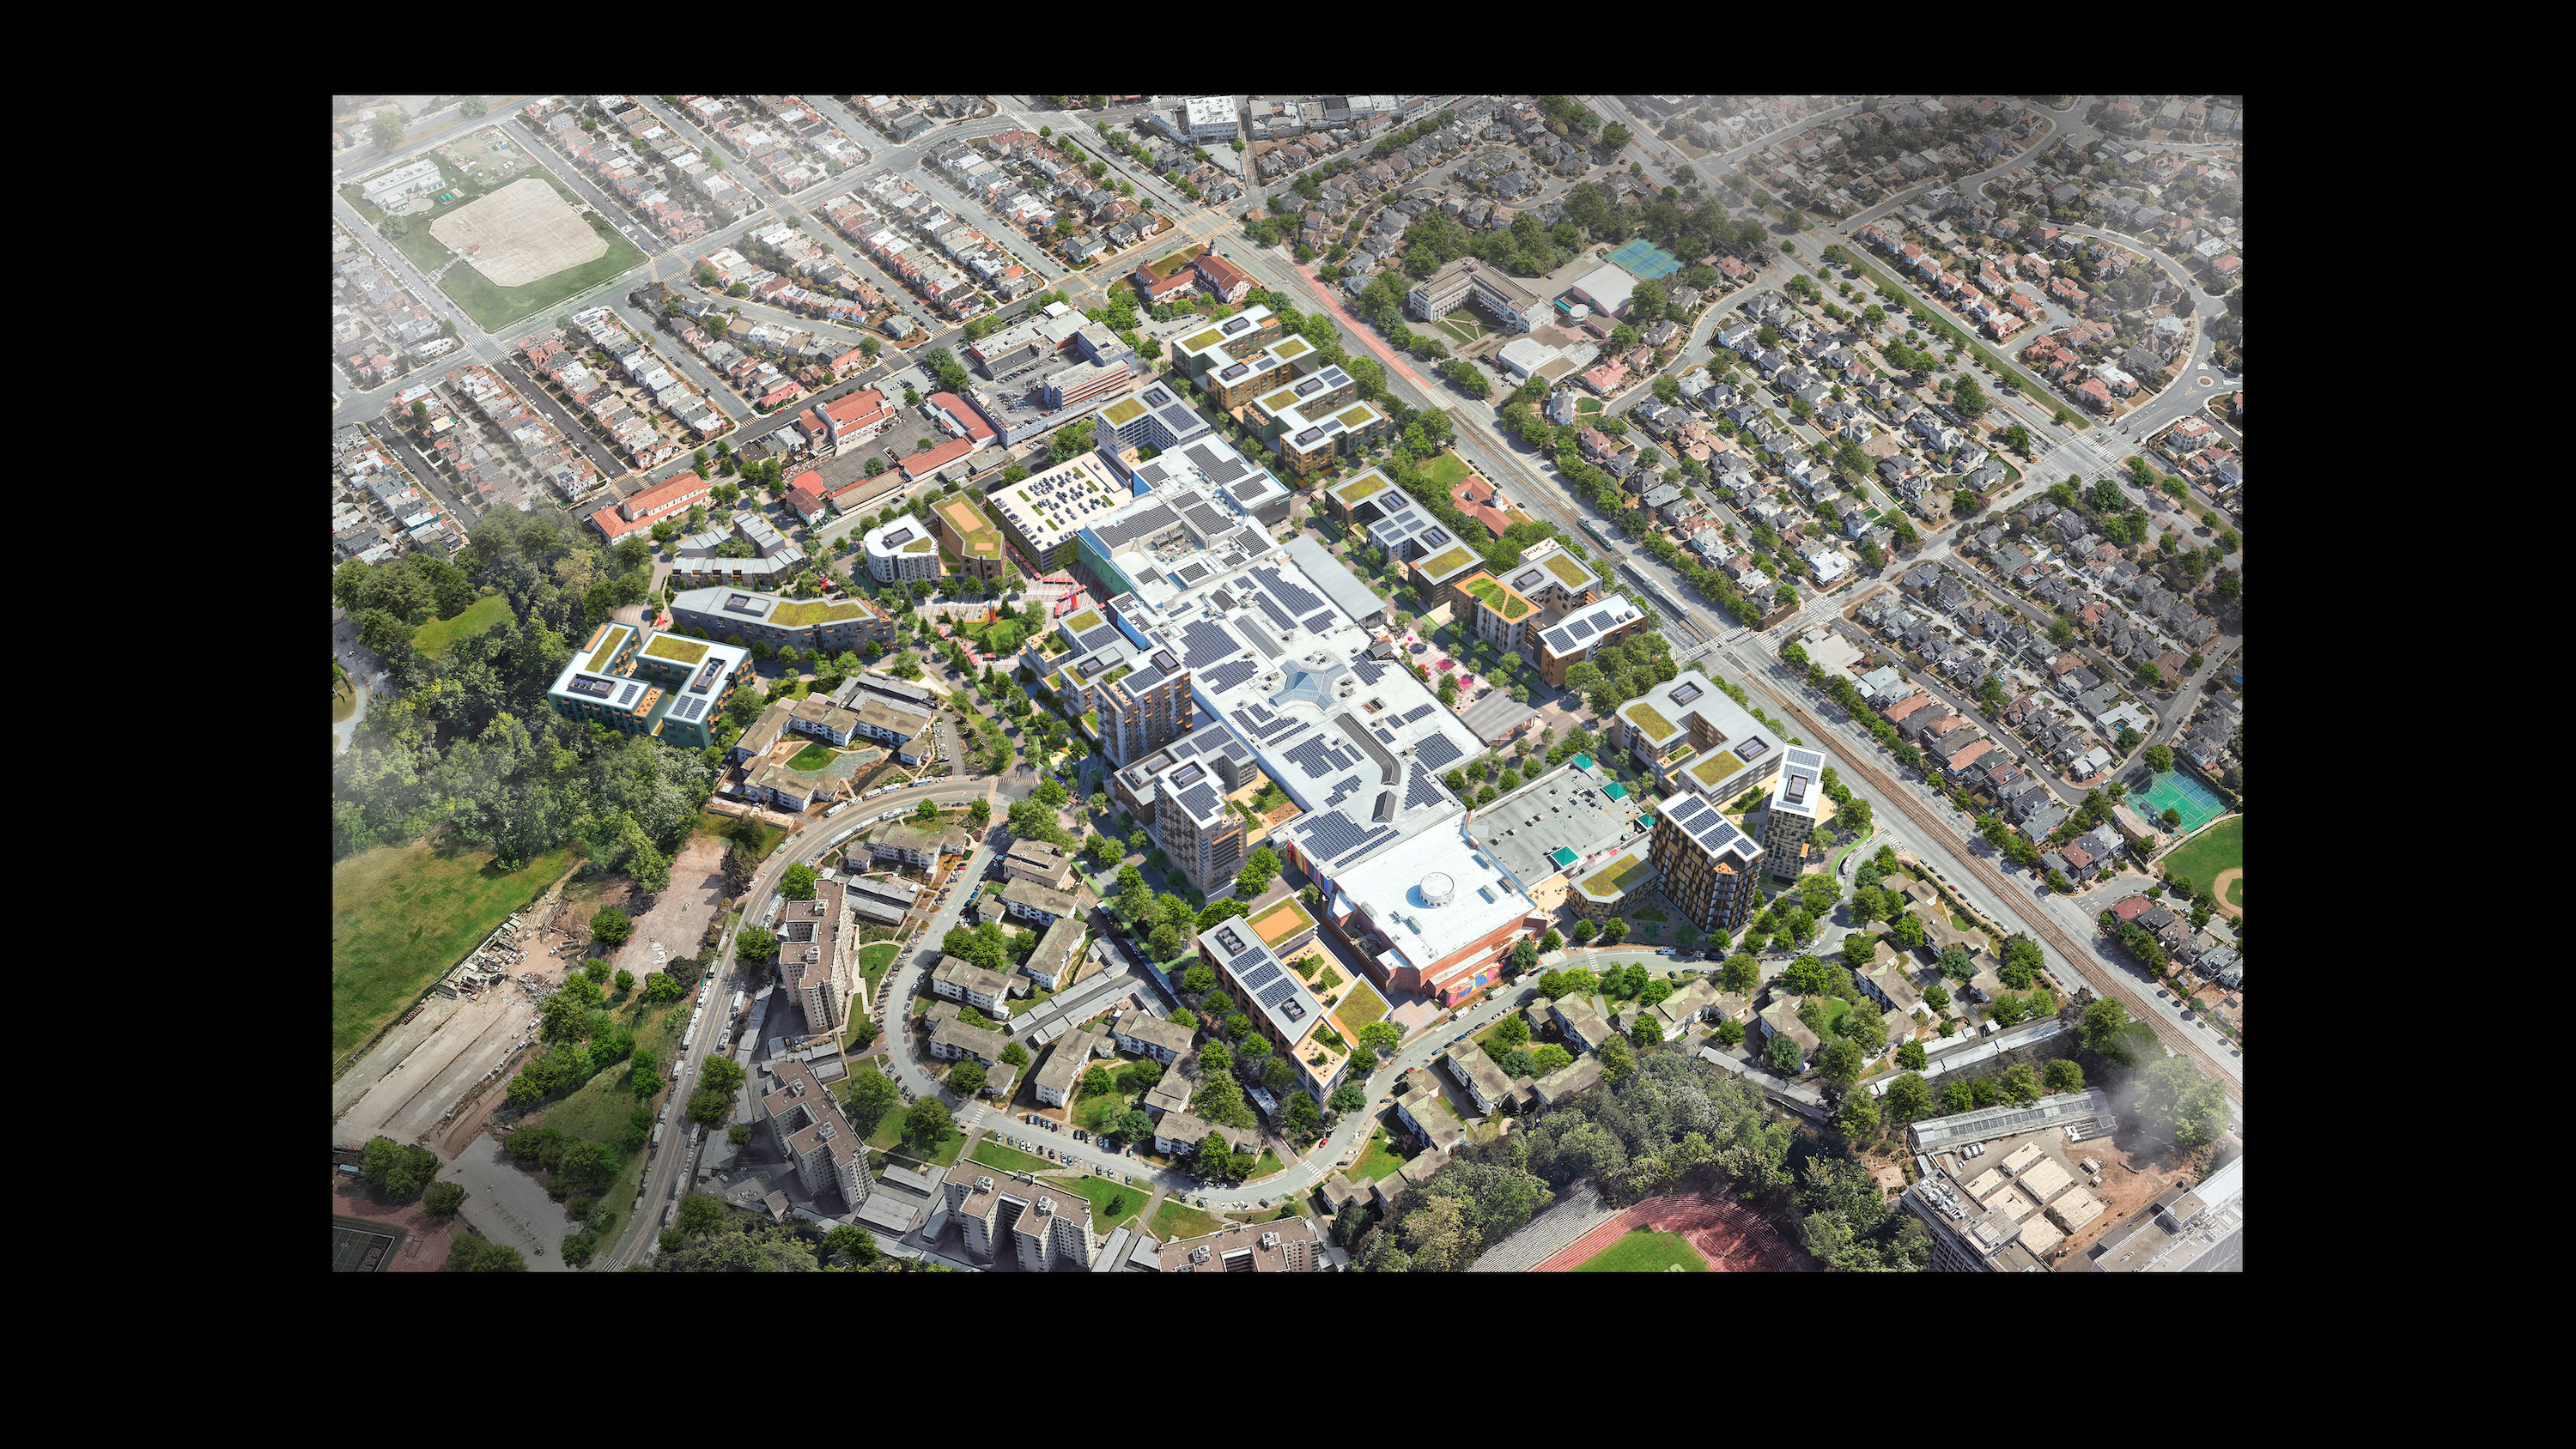 An aerial view of a housing development that could surround a mall with buildings, green space, parking and other amenities.